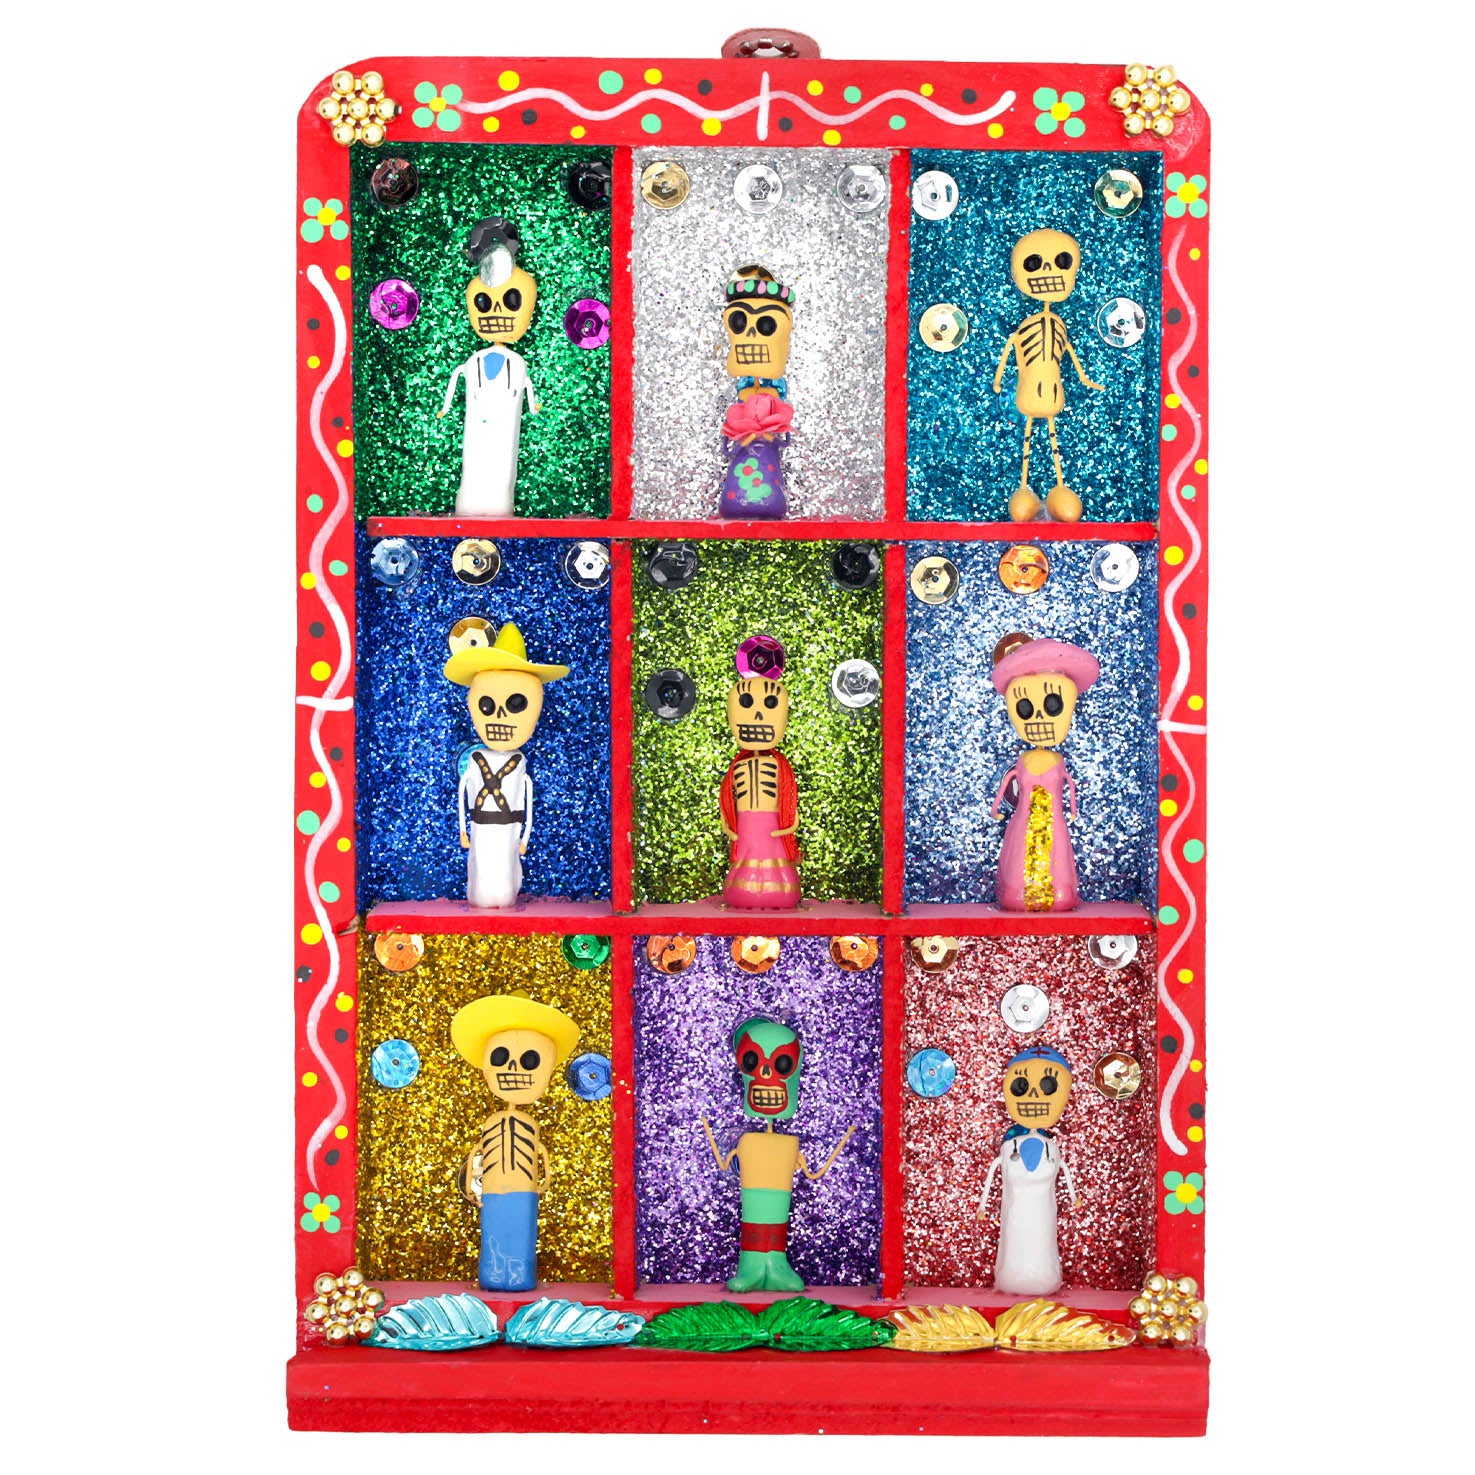 Traditional Calacas Day of the Dead Shadow Box